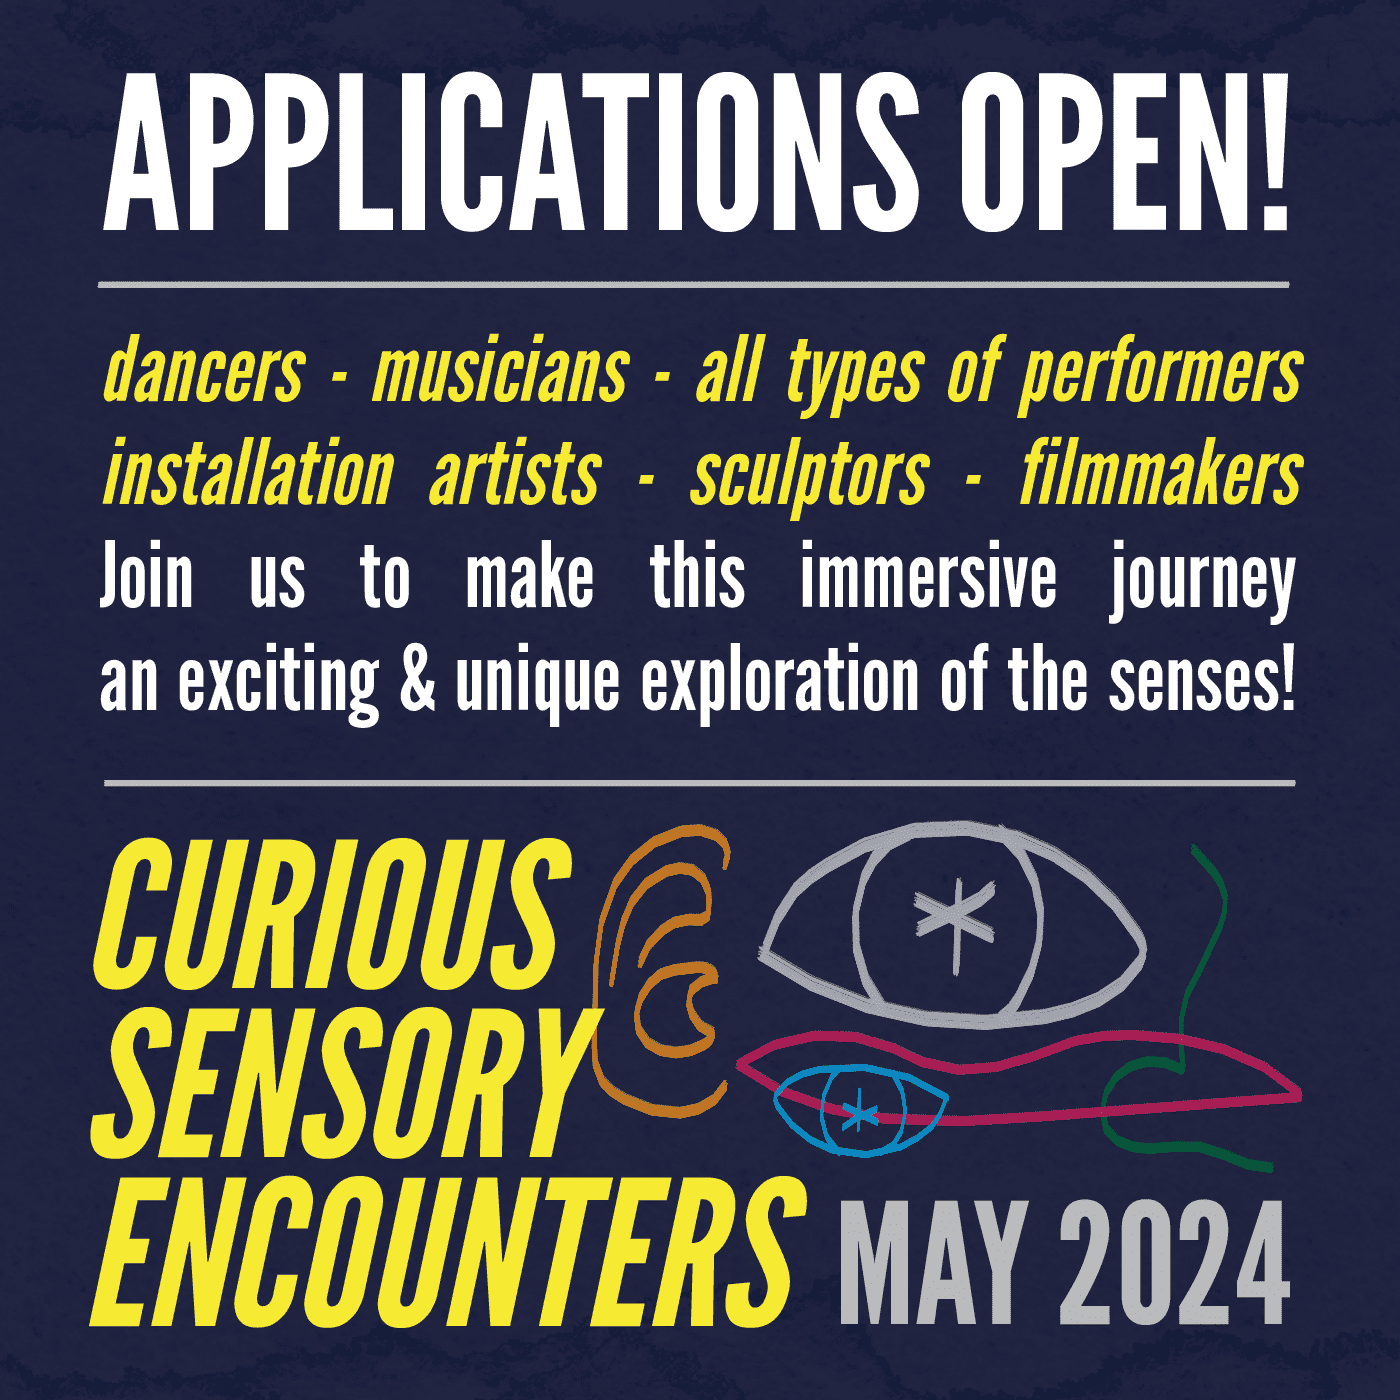 Applications open! Dancers, musicians, all types of performers, installation artists, sculptors, filmmakers. Join us to make this immersive journey an exciting and unique exploration of the senses! Curious Sensory Encounters May 2024